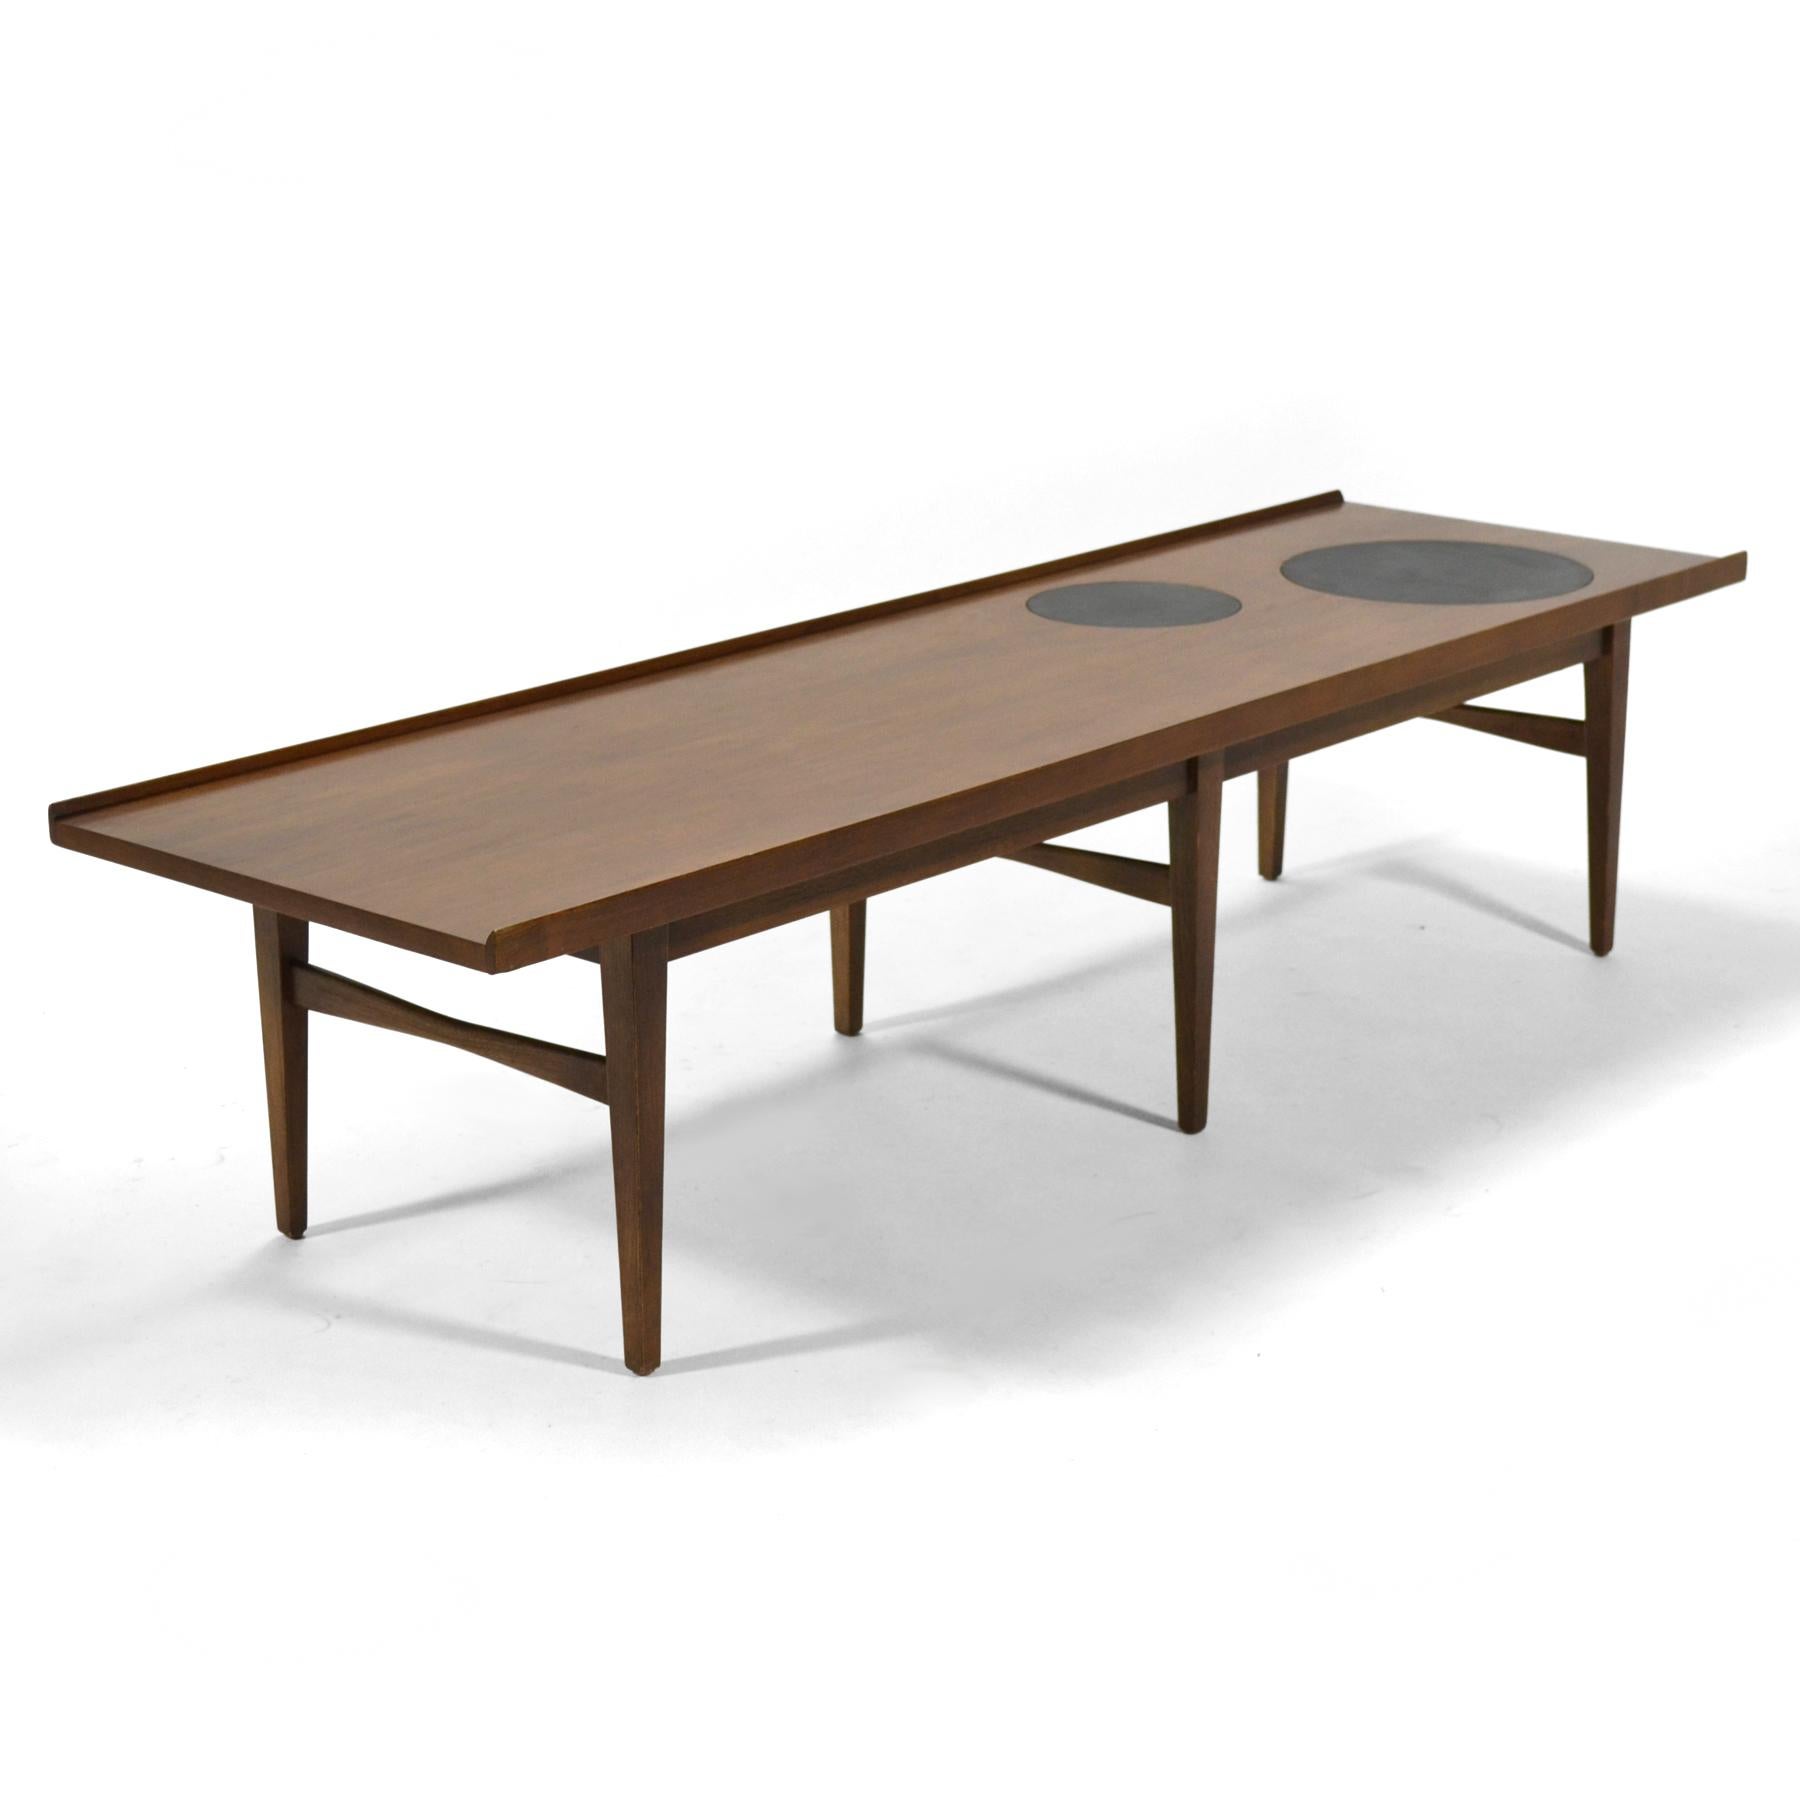 This fantastic walnut coffee table by American of Martinsville has several nice details. It has bow tie shaped stretchers, raised edges on the sides, and two circular mica inserts in the top.